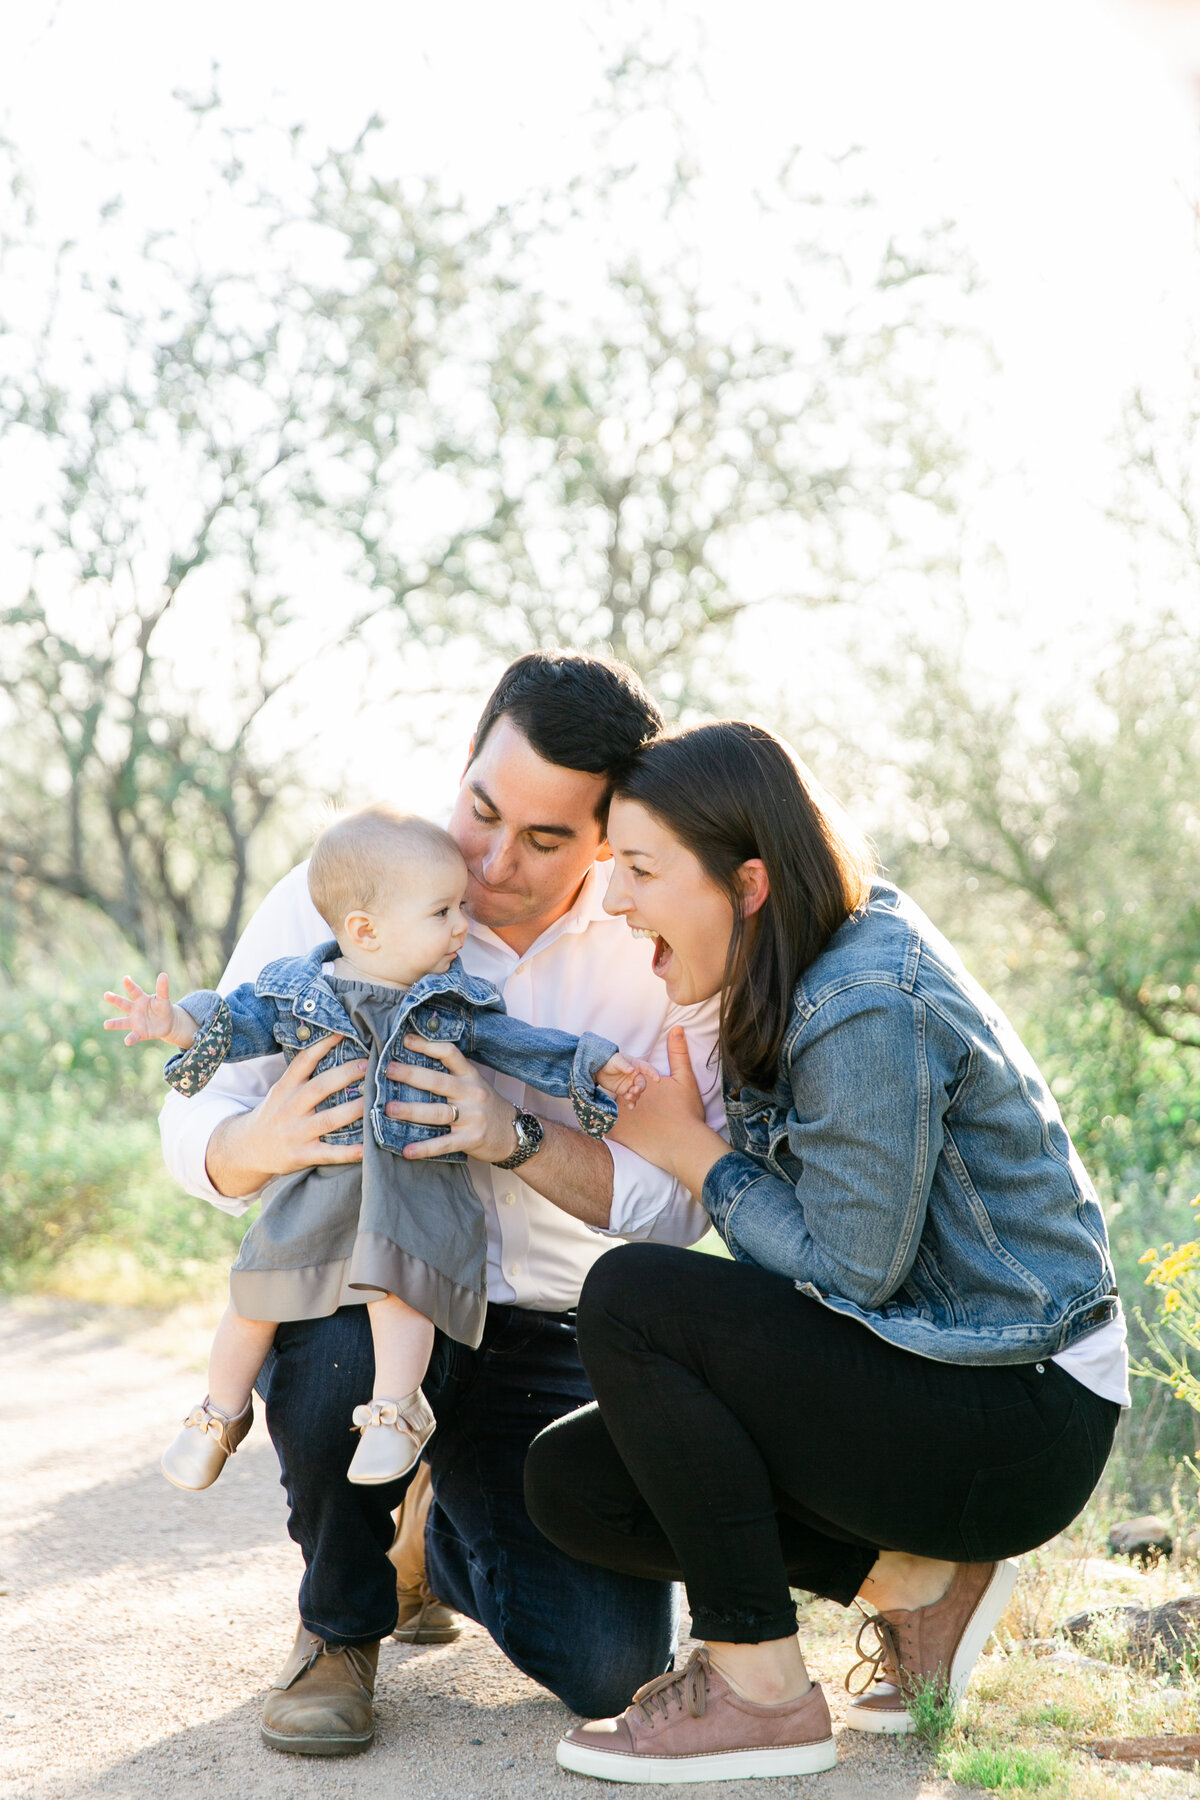 Karlie Colleen Photography - Scottsdale family photography - Victoria & family-12